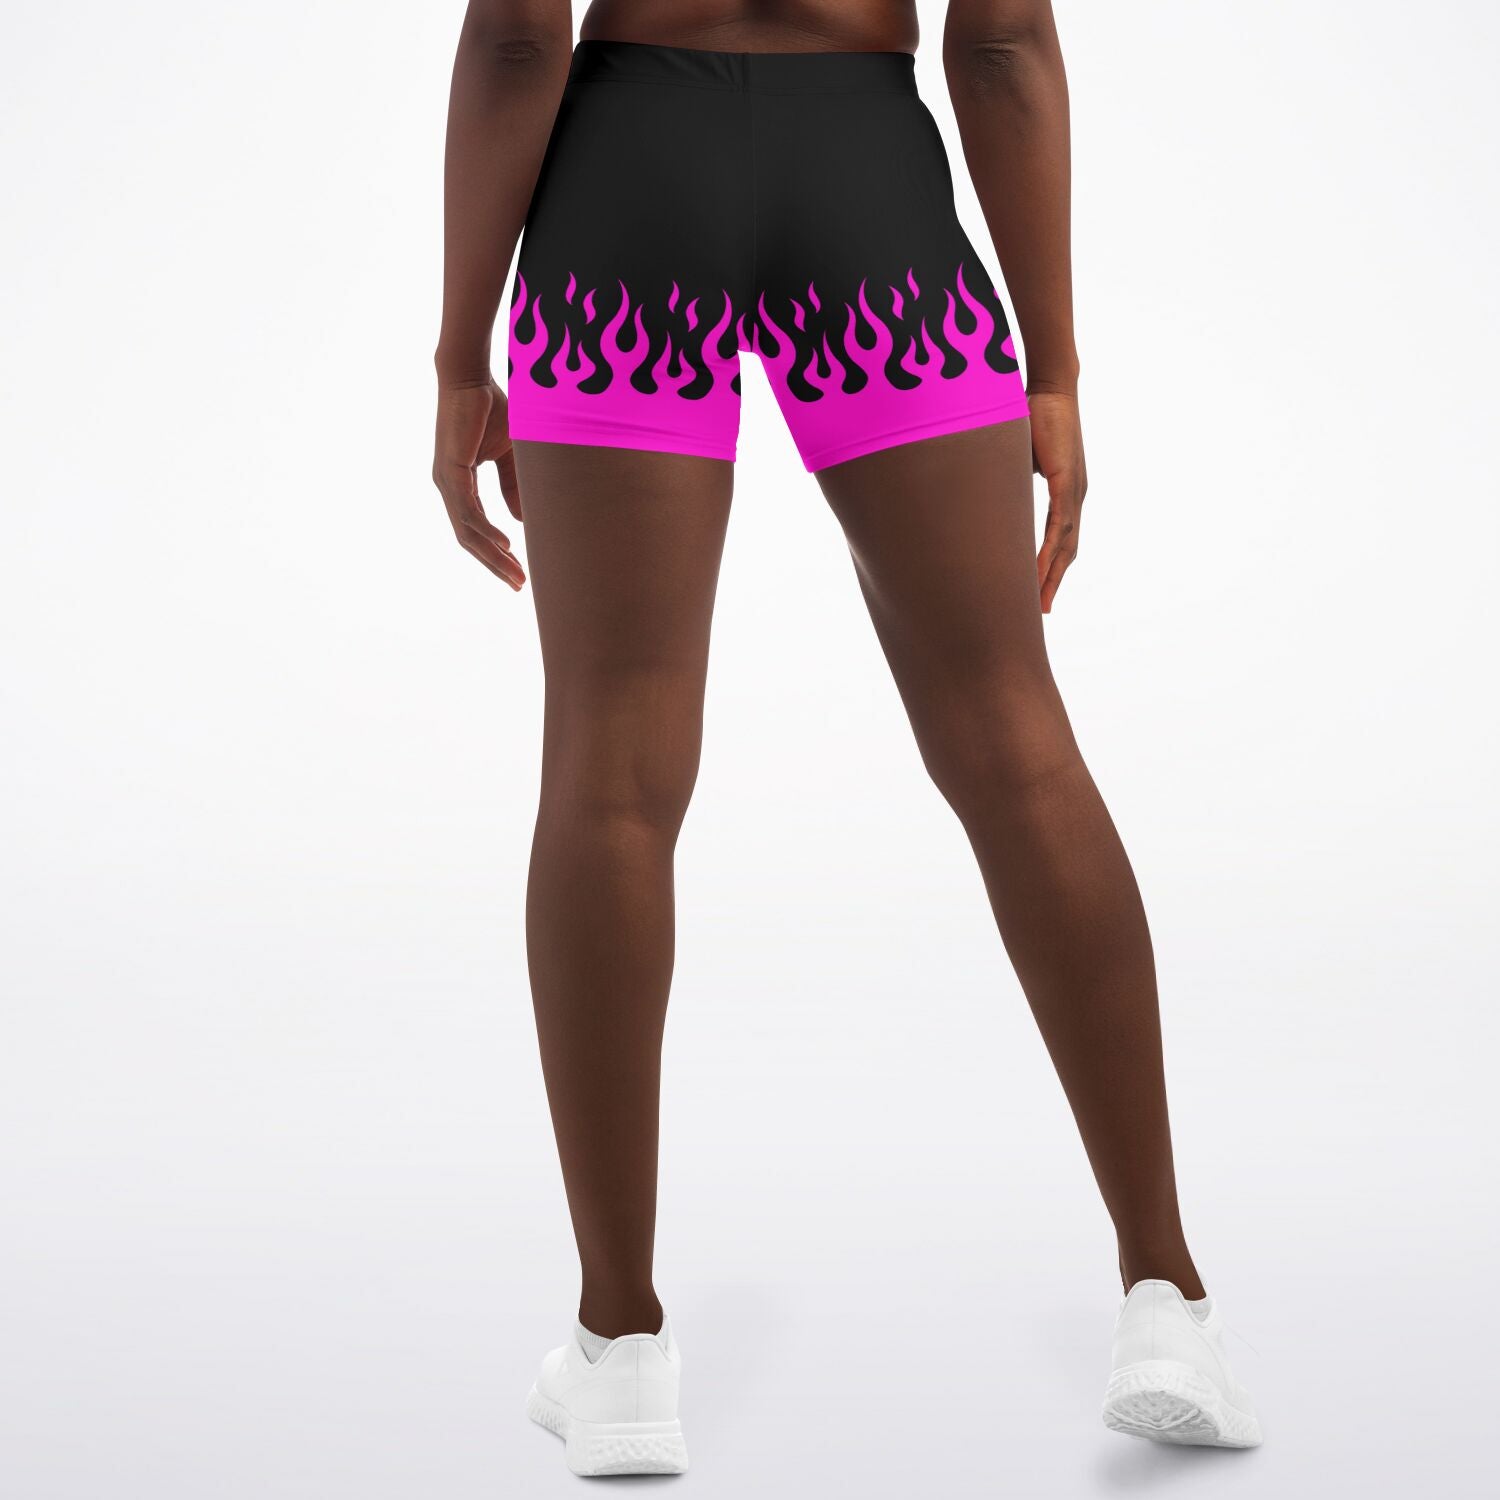 Women's Retro Classic Pink Fire Flames Mid-Rise Athletic Yoga Booty Shorts Model Back